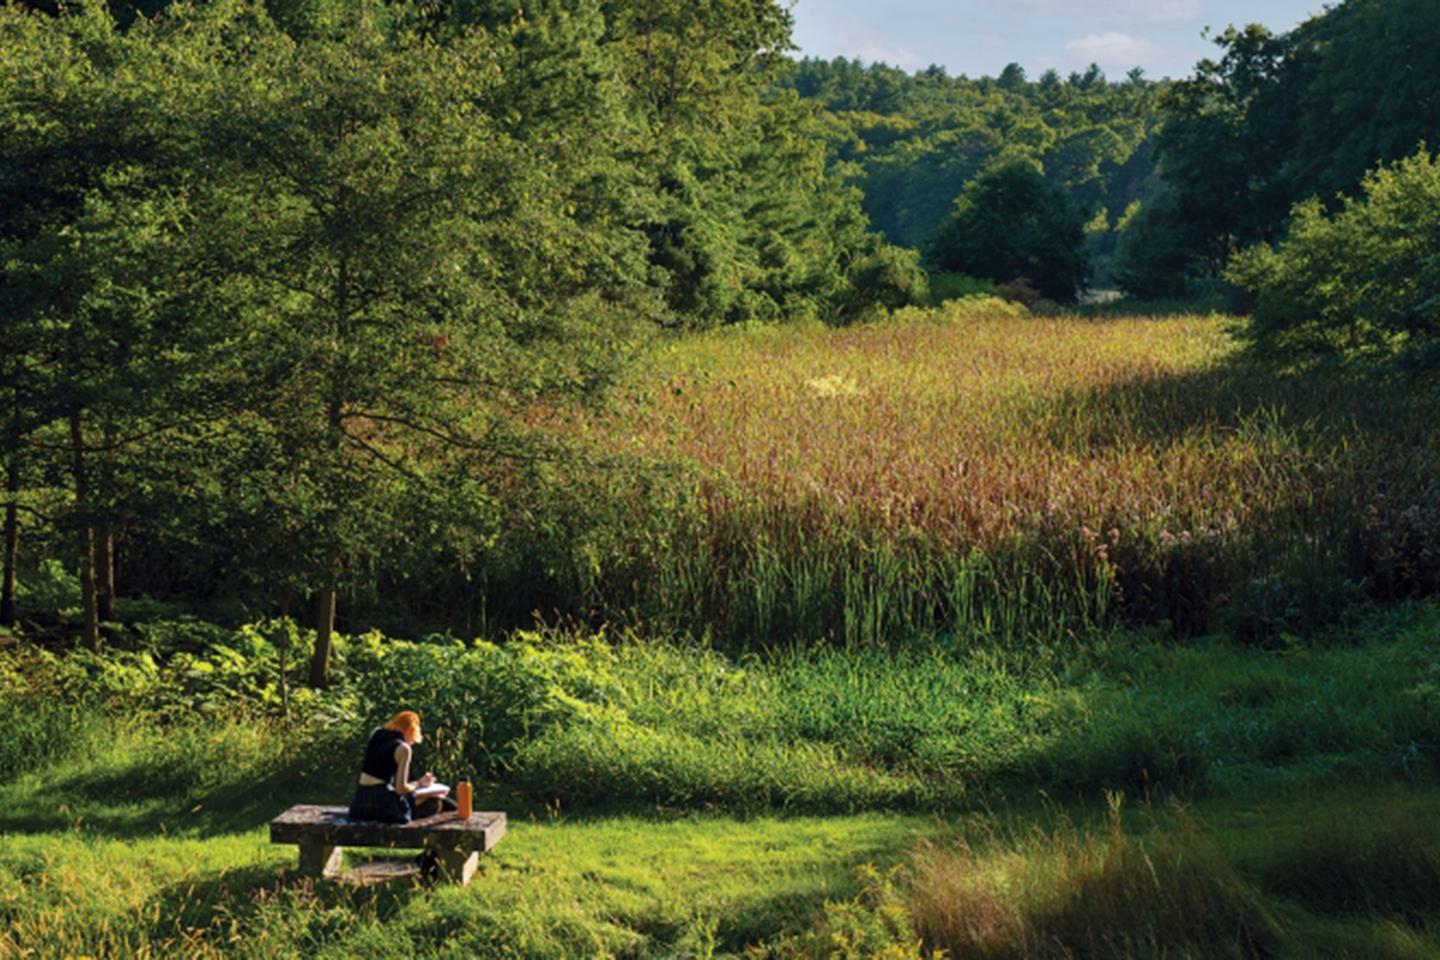 A photo showing Alumnae Valley with a student sitting on top of a picnic table, head bent toward the notebook in her lap.